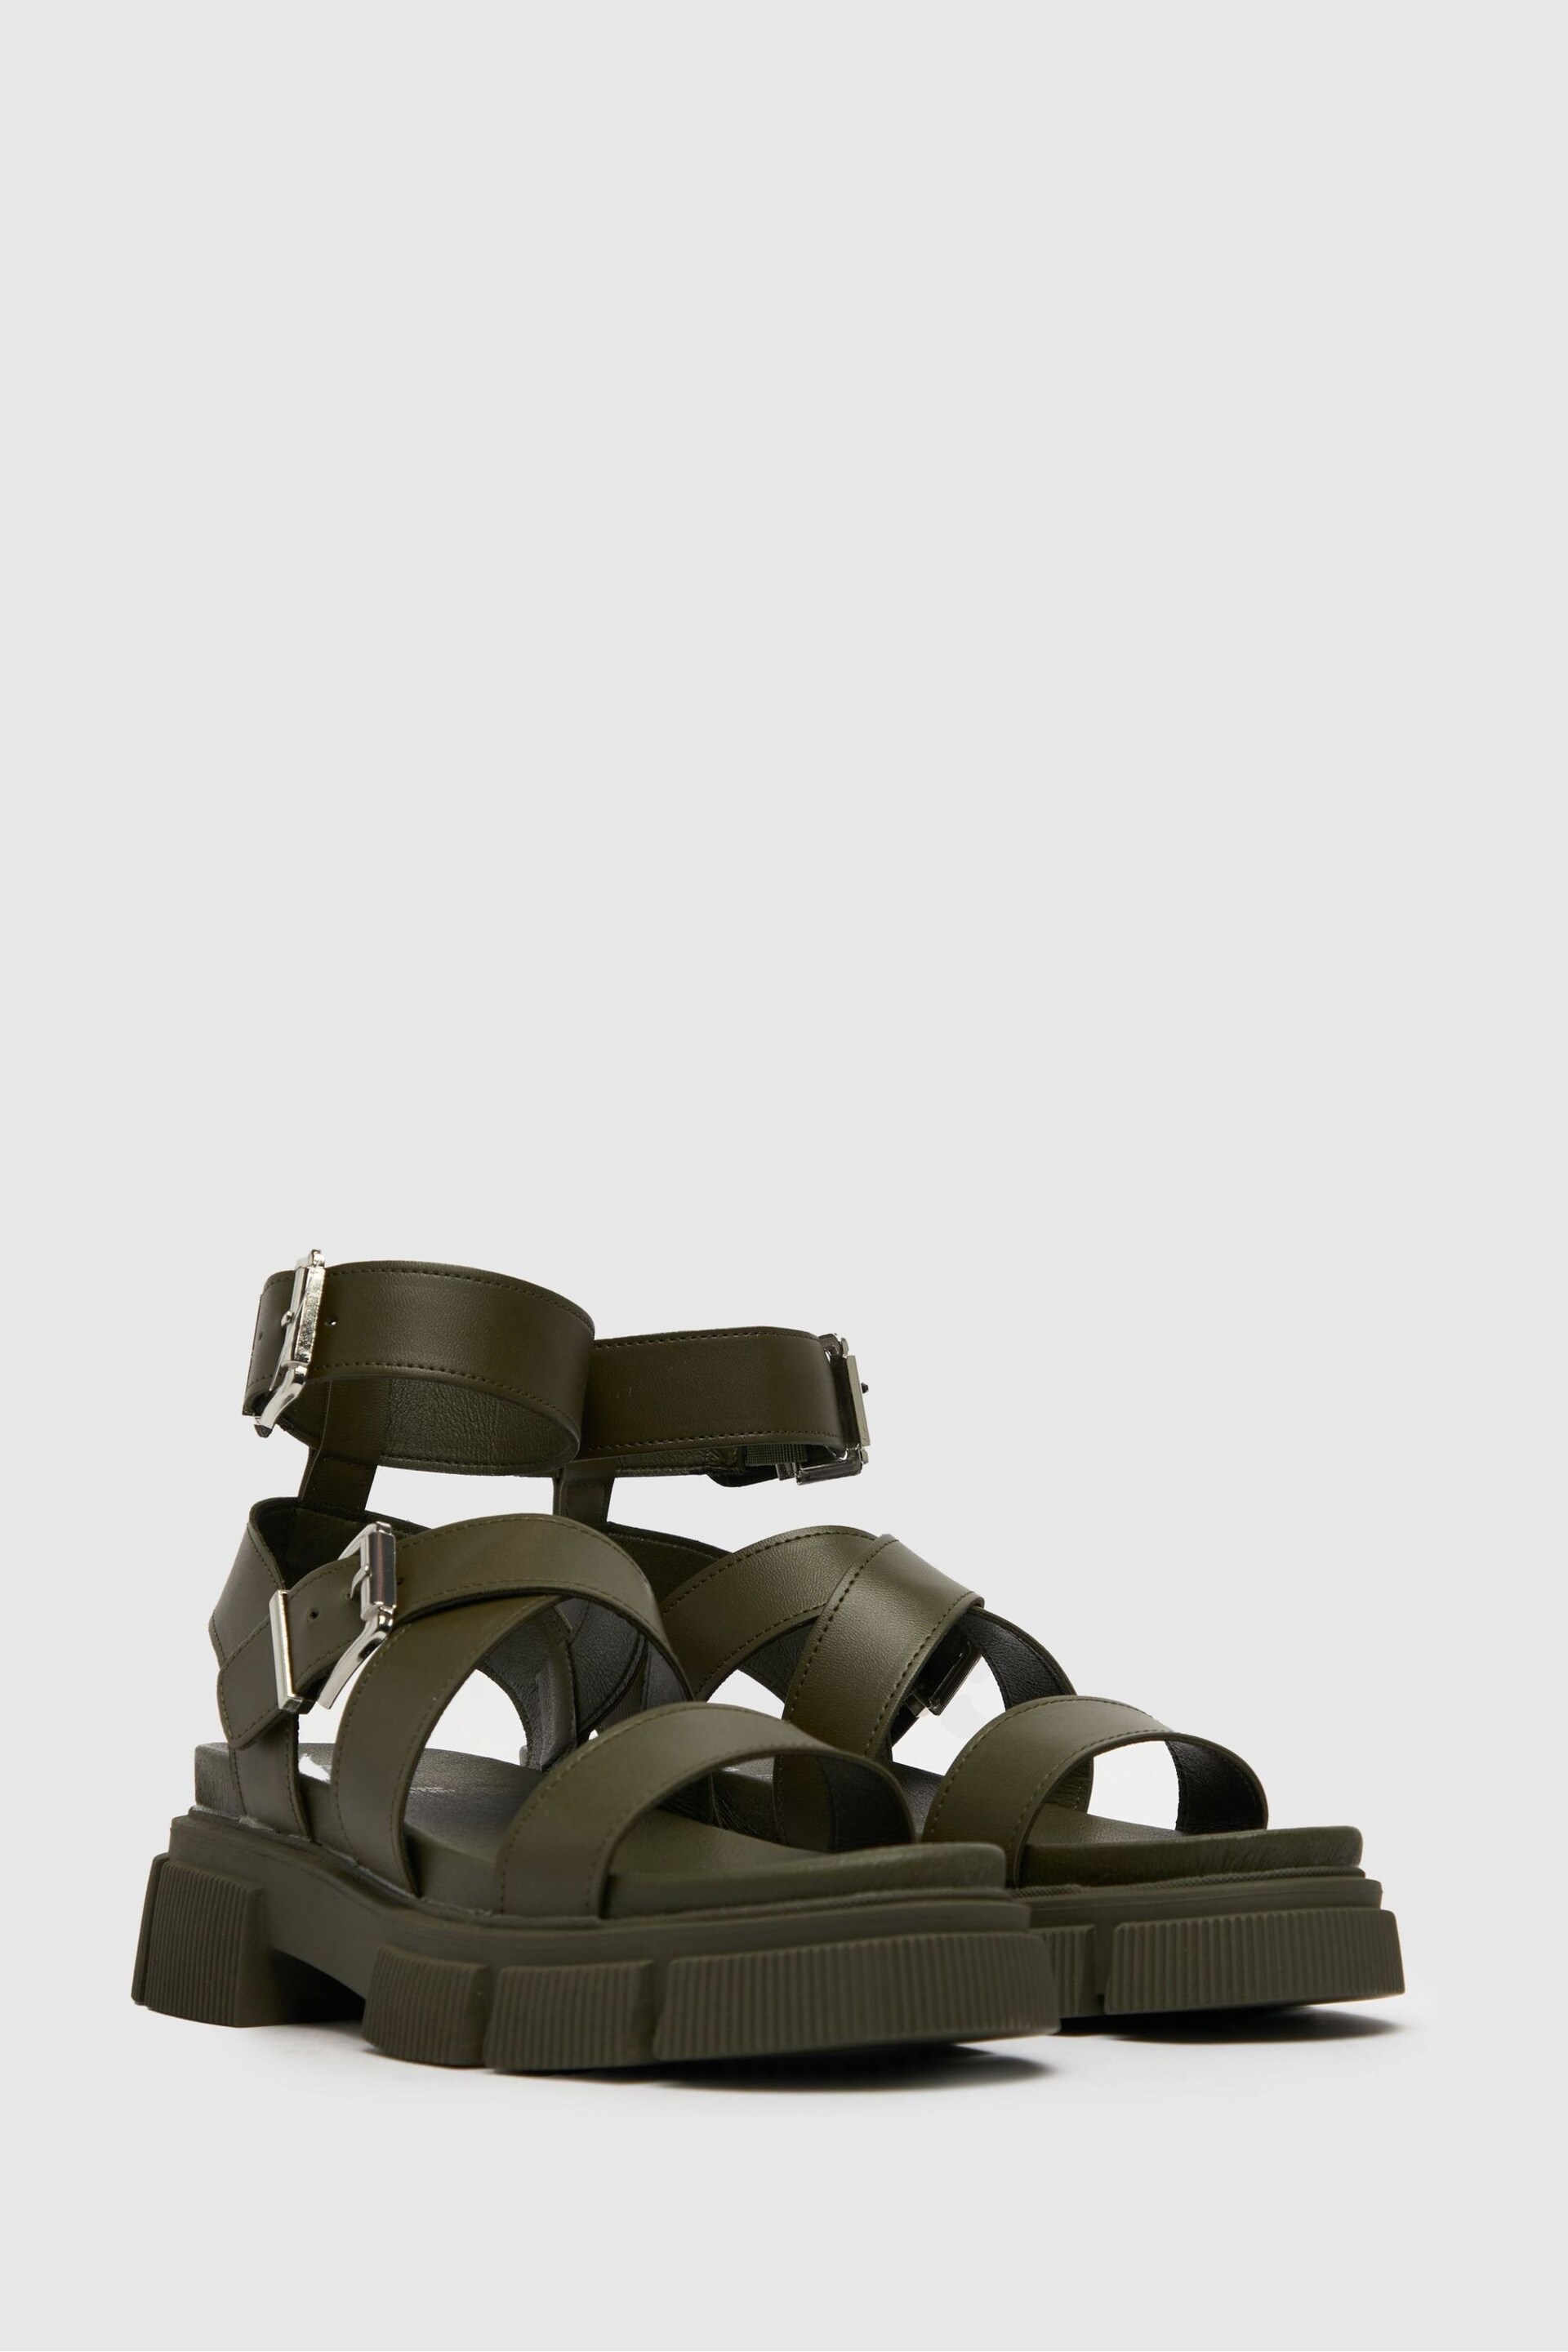 Schuh Toulouse Chunky Sandals - Image 3 of 4